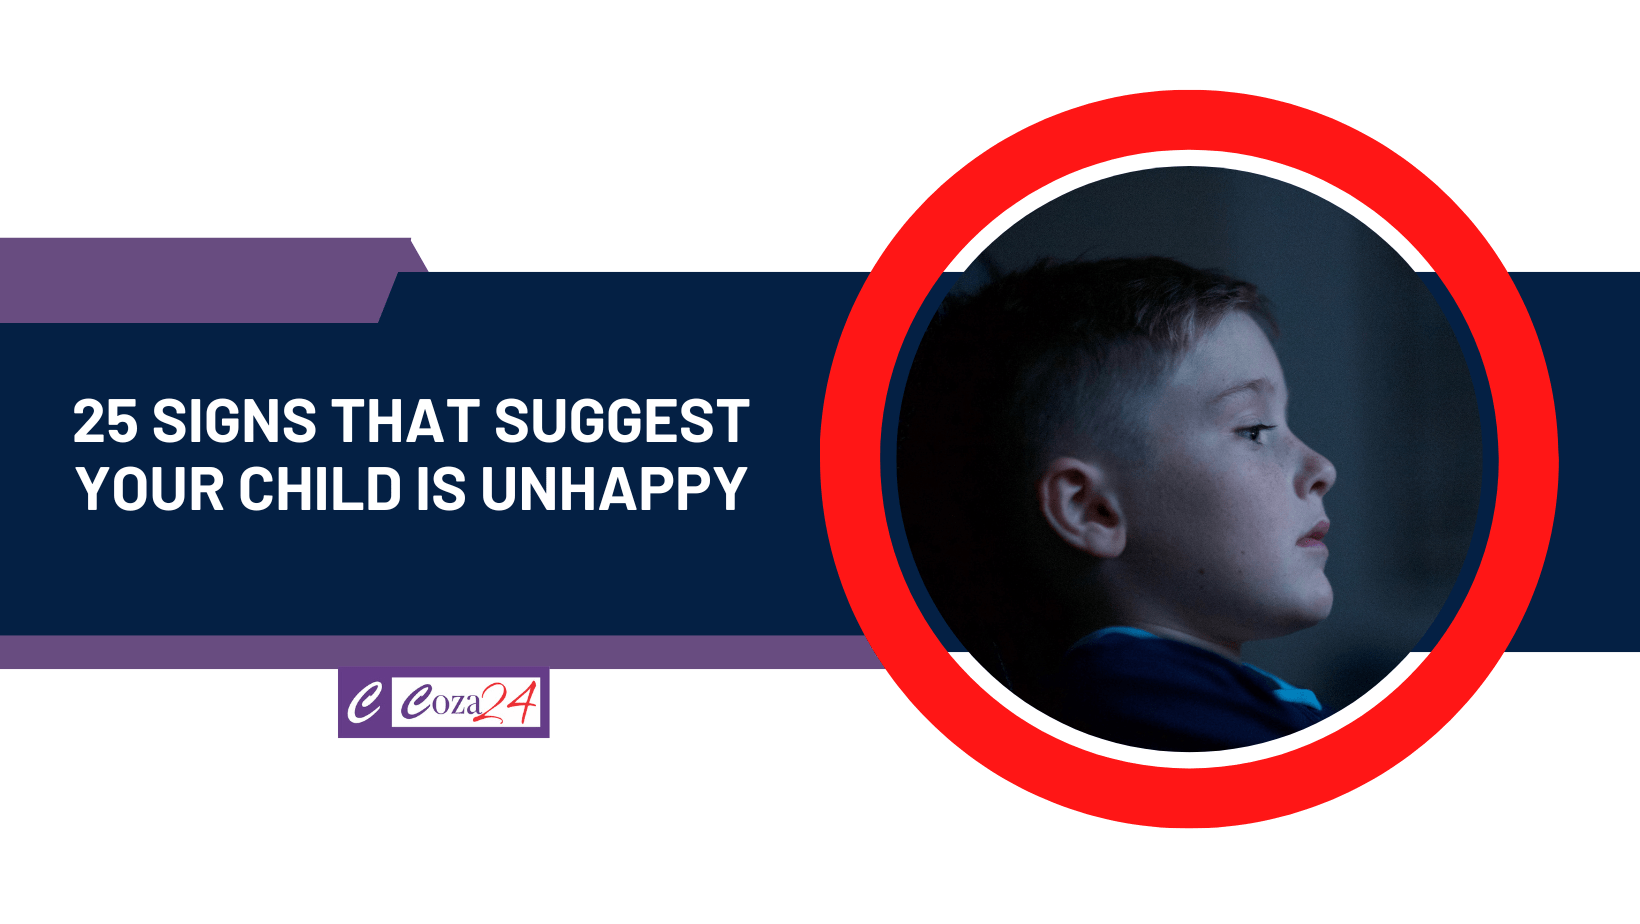 25 Signs That Suggest Your Child is Unhappy